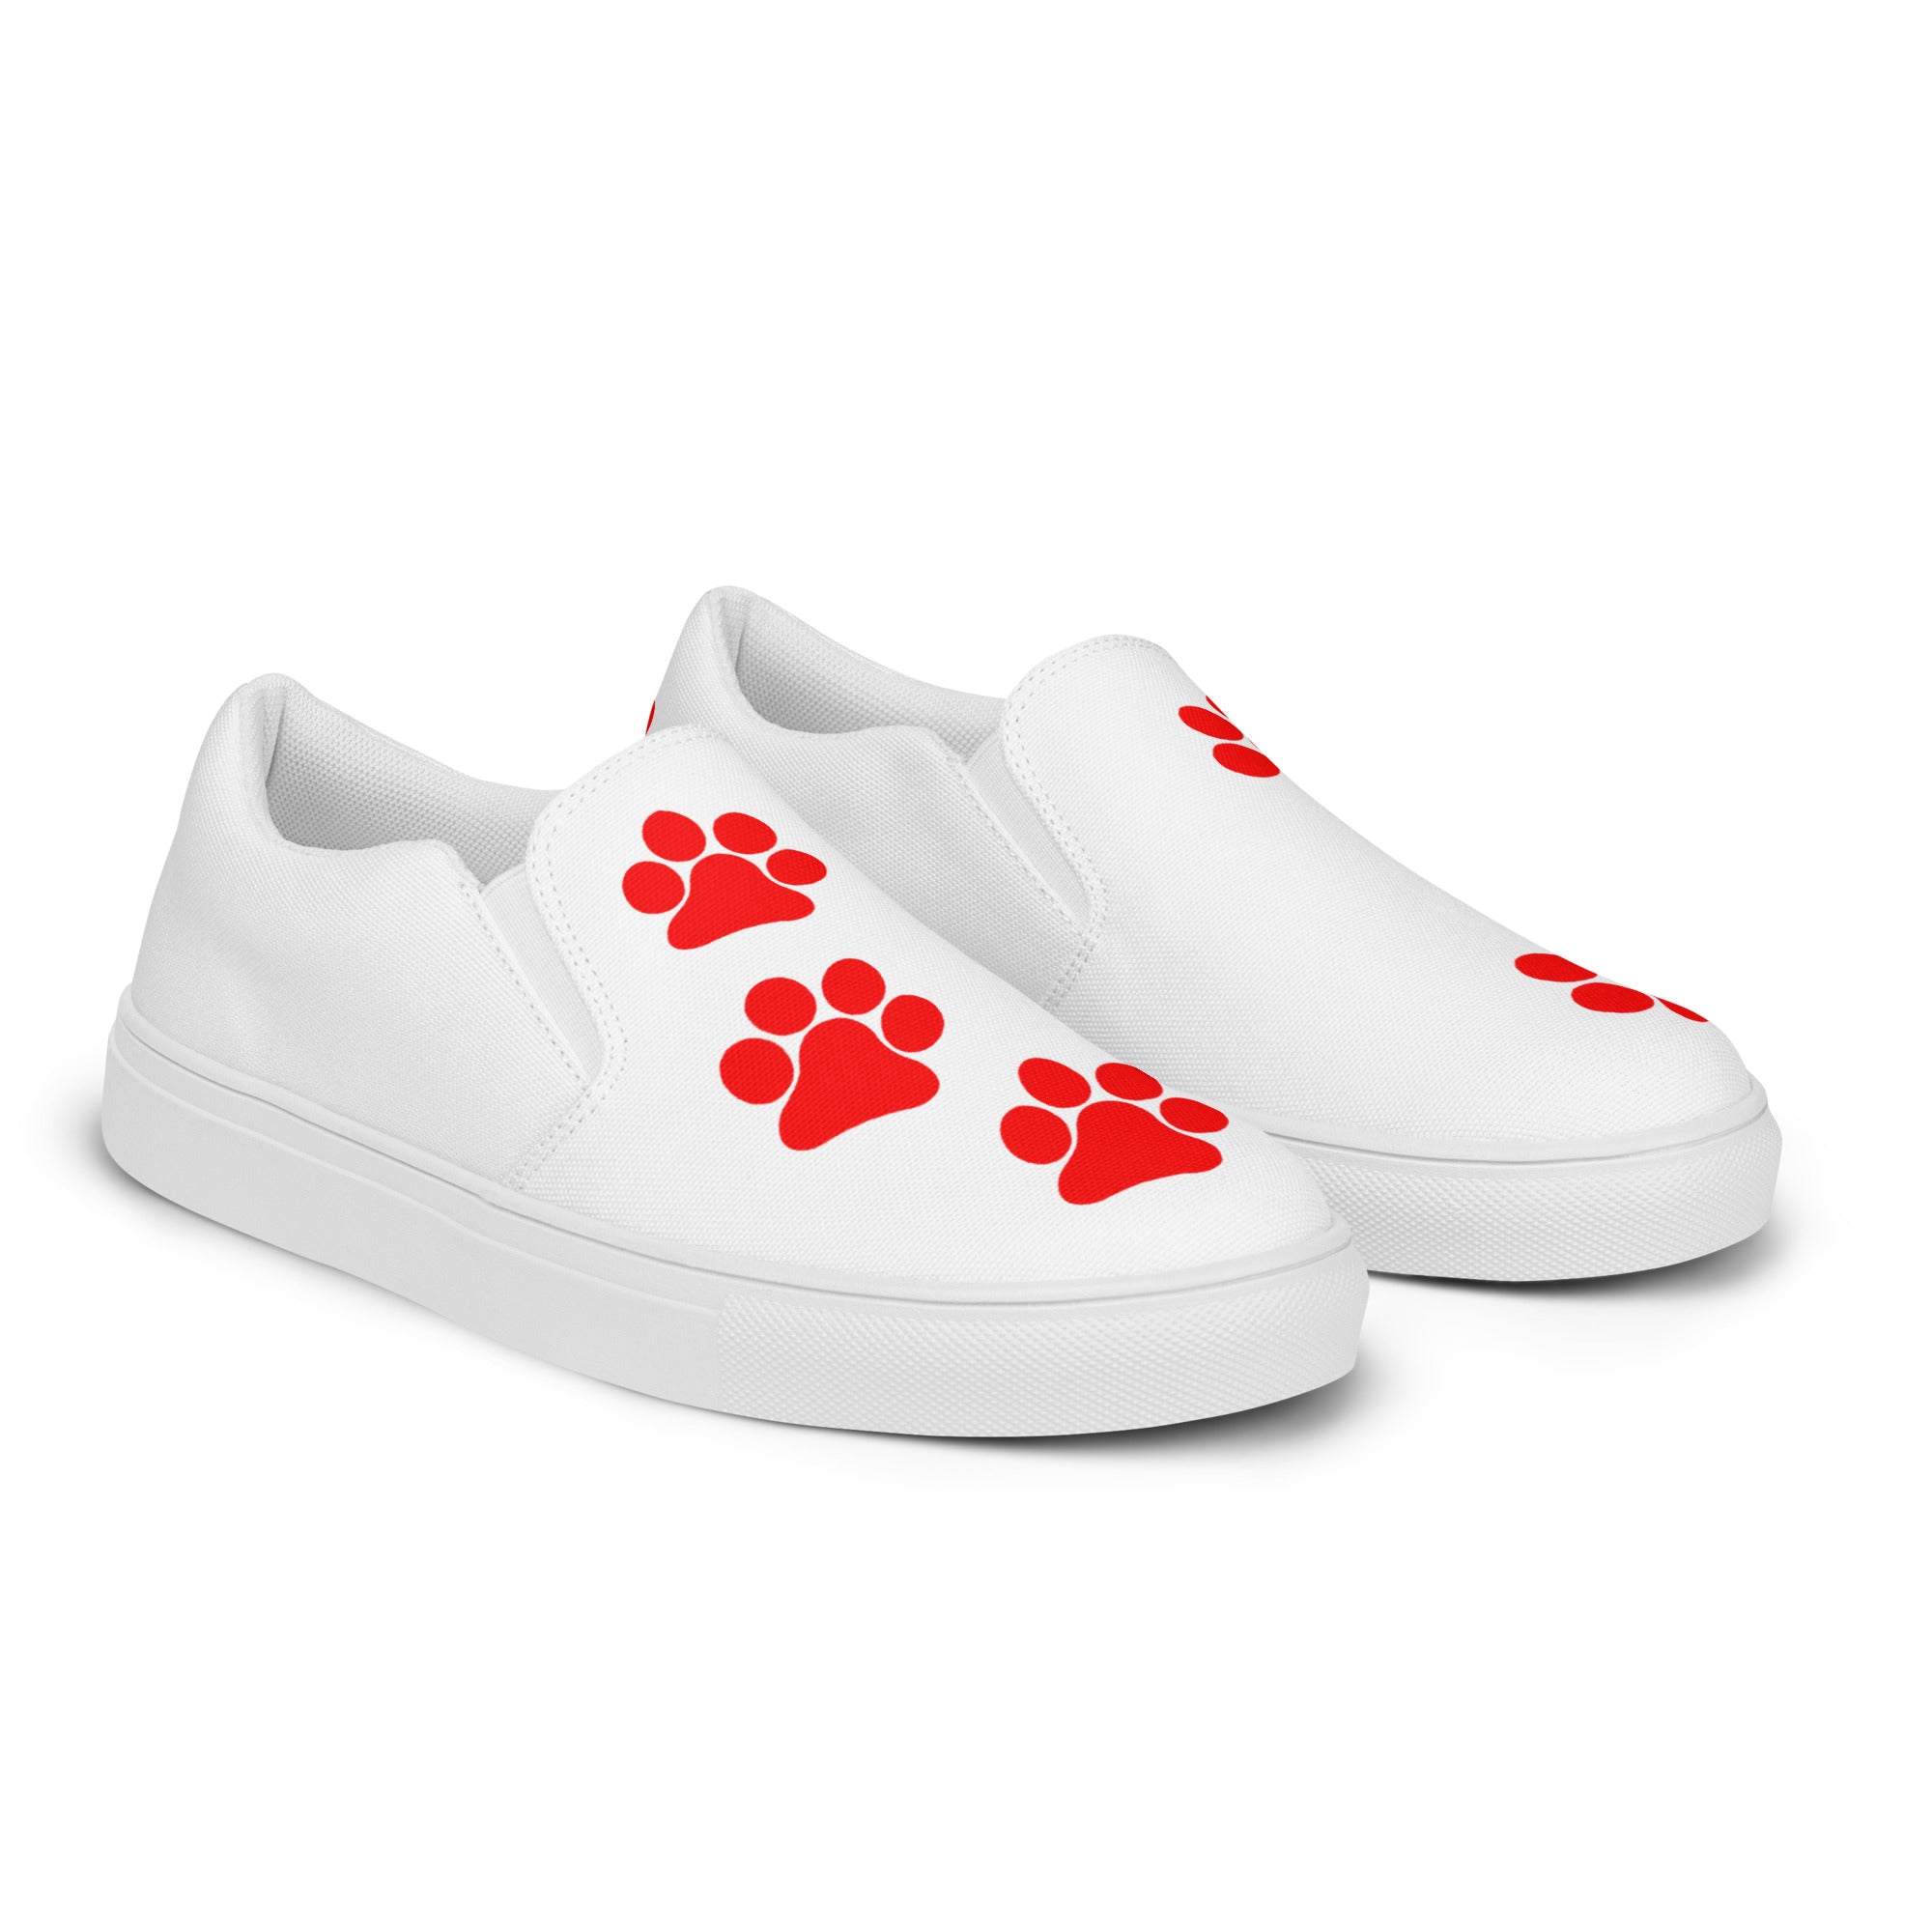 Women’s slip-on Red Paw shoes